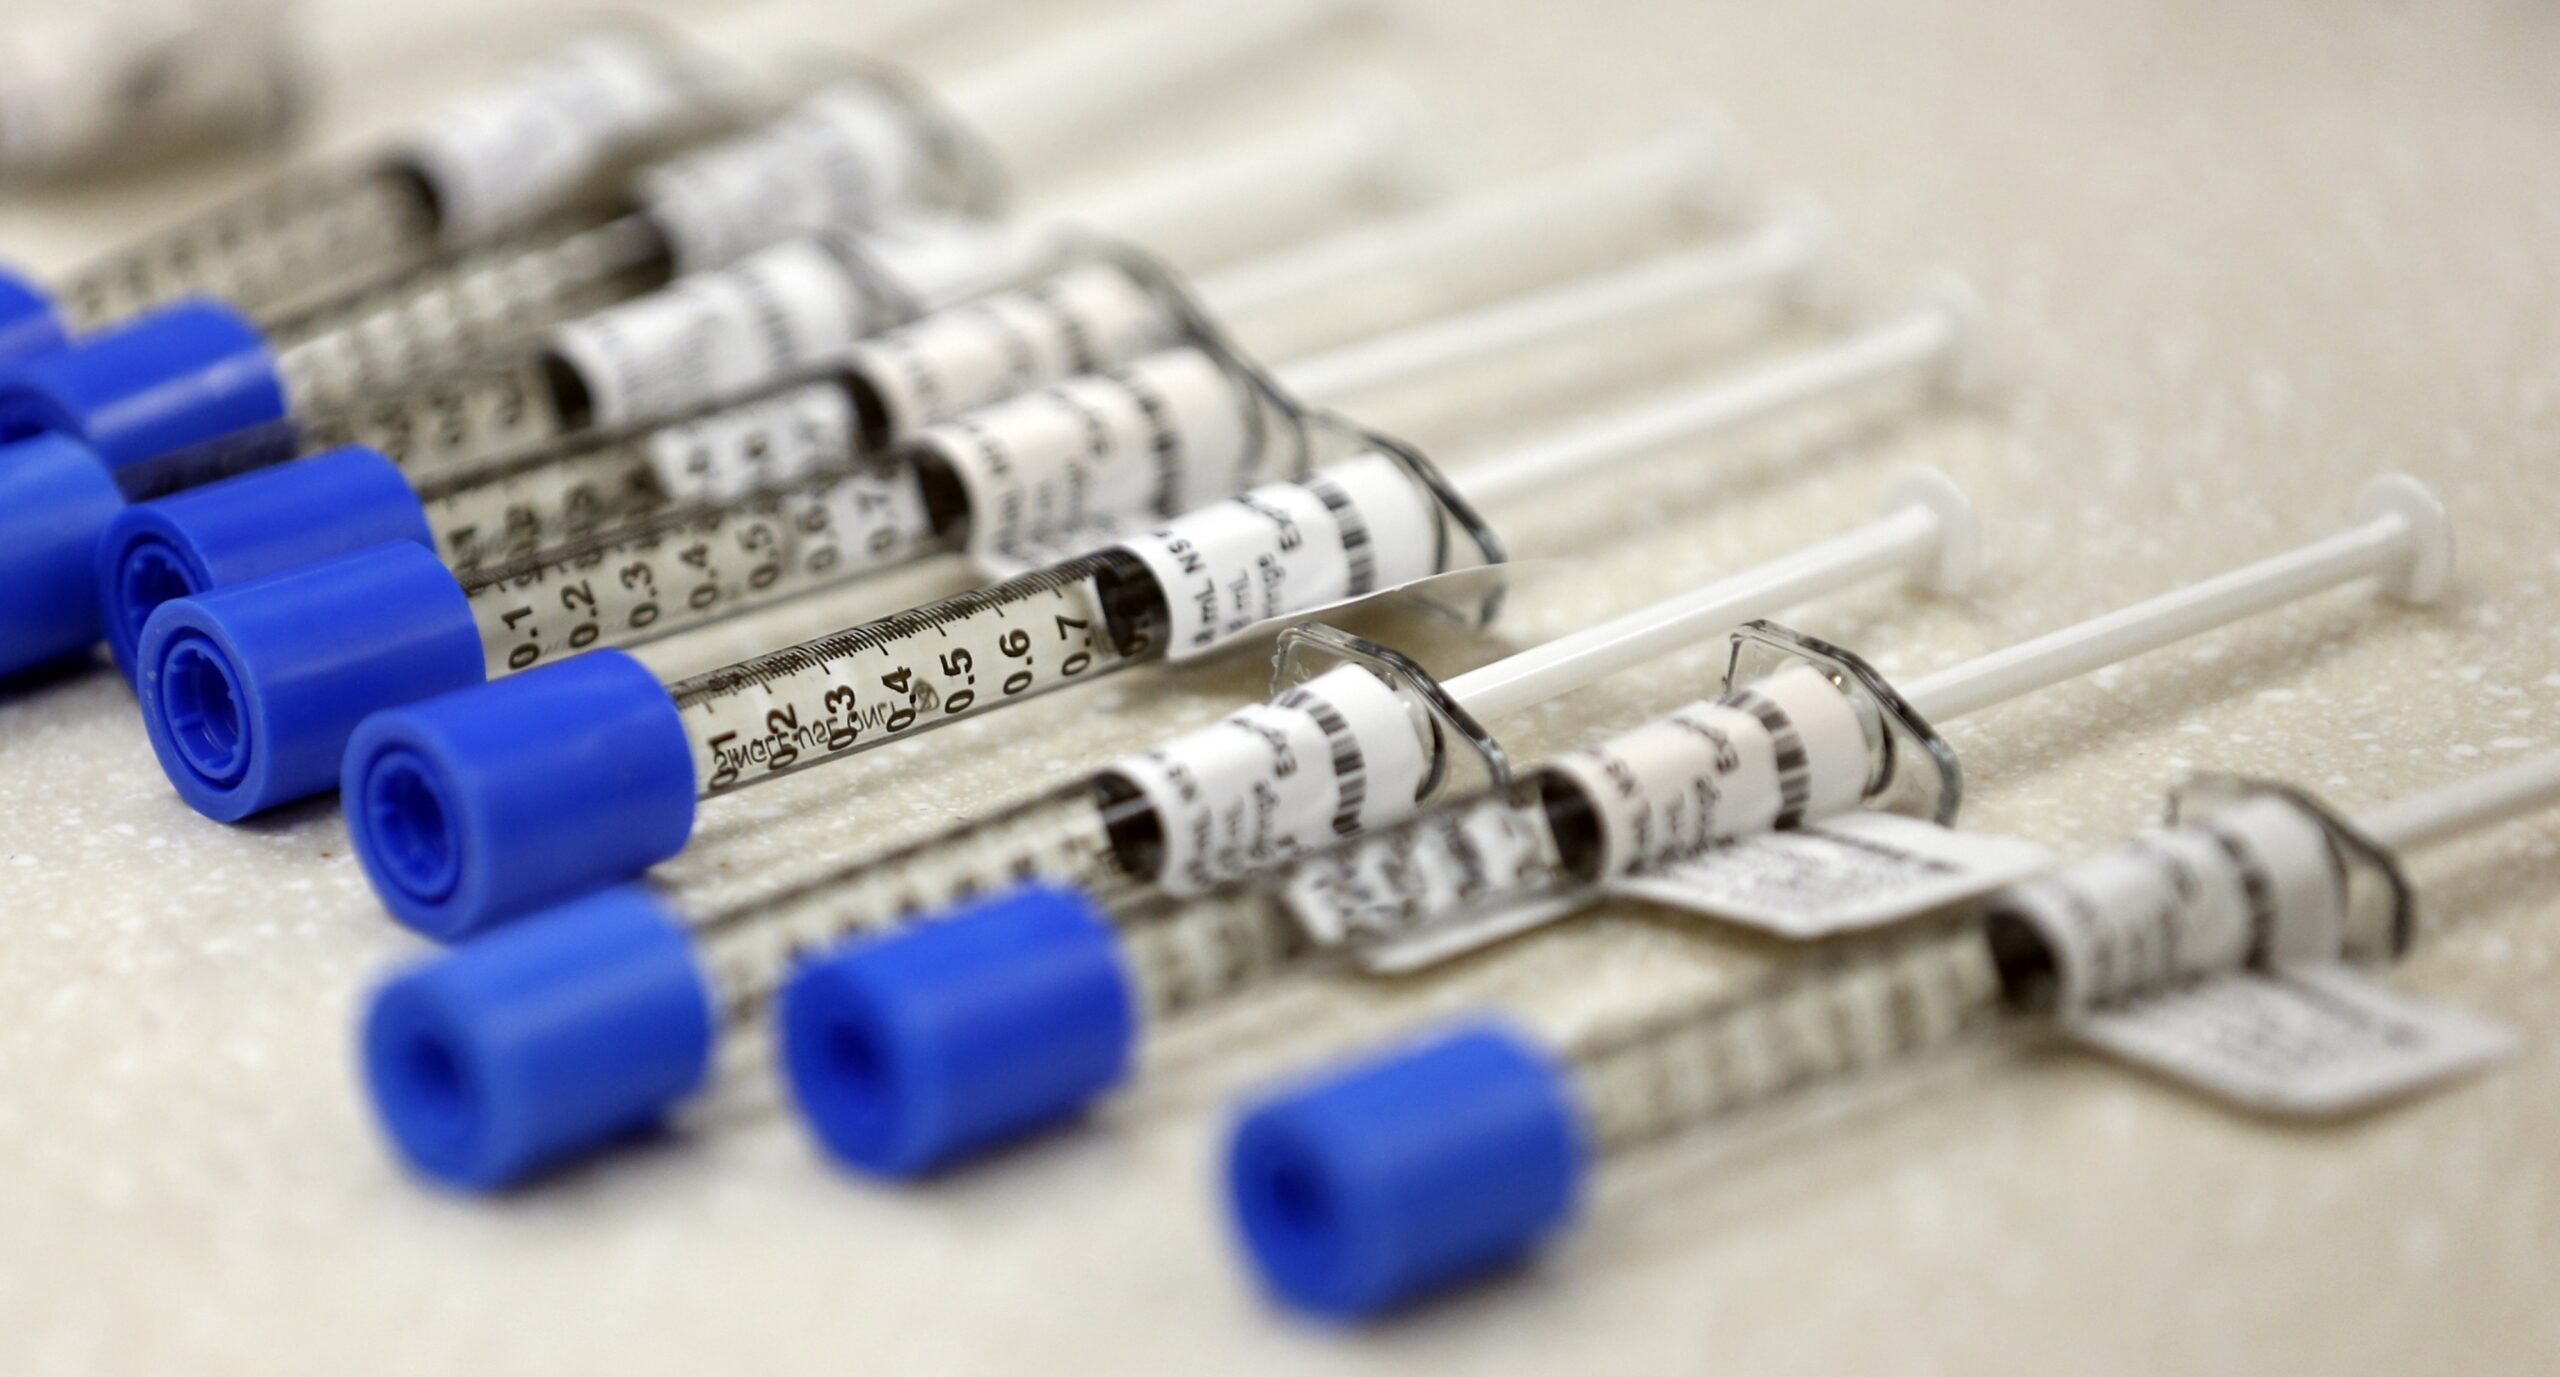 Syringes of the opioid painkiller fentanyl